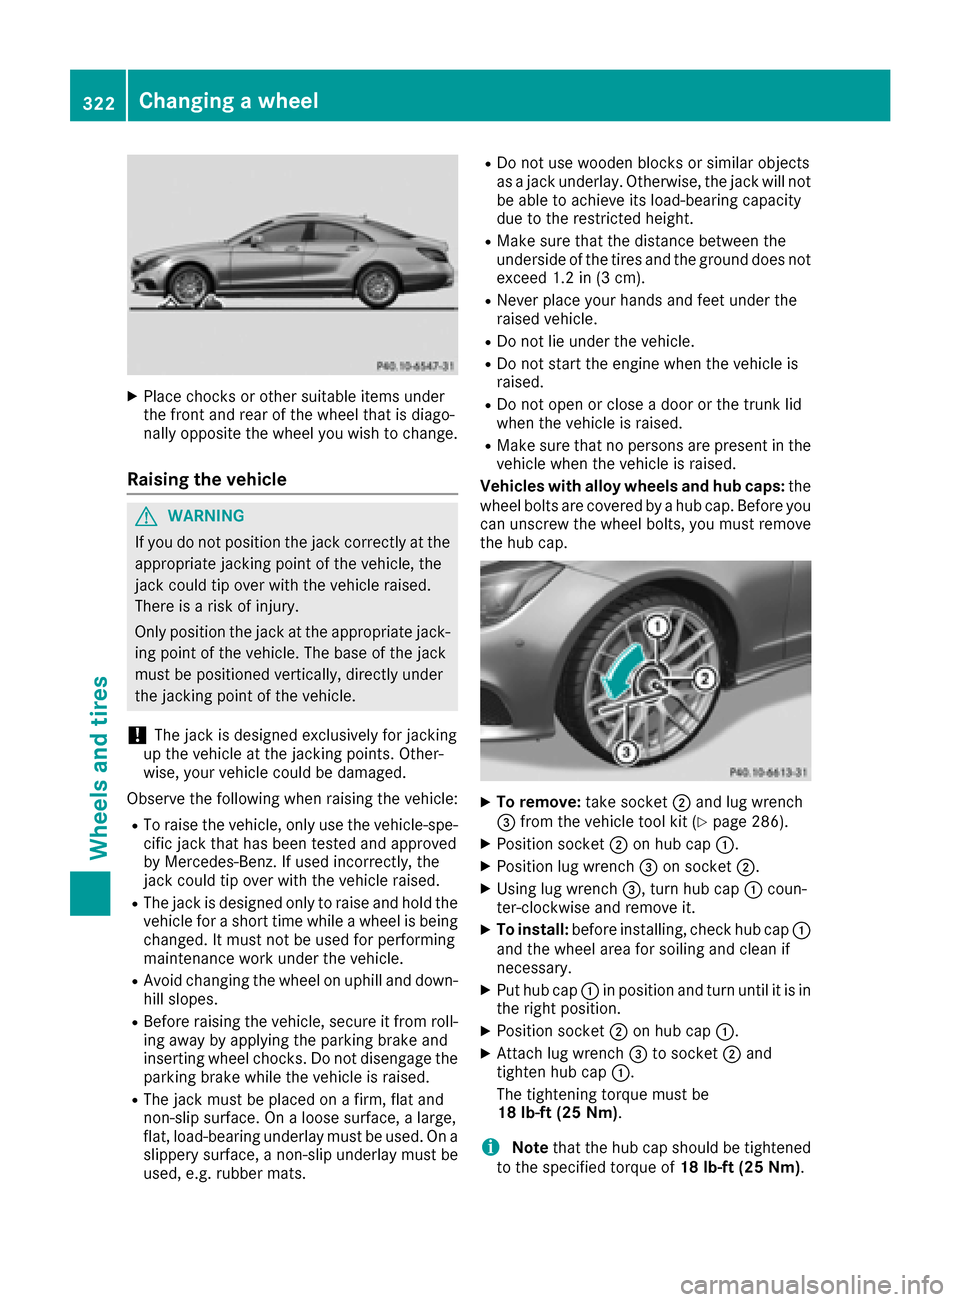 MERCEDES-BENZ CLS-Class 2016 W218 Owners Guide XPlace chocks or other suitable items under
the front and rear of the wheel that is diago-
nally opposite the wheel you wish to change.
Raising the vehicle
GWARNING
If you do not position the jack cor